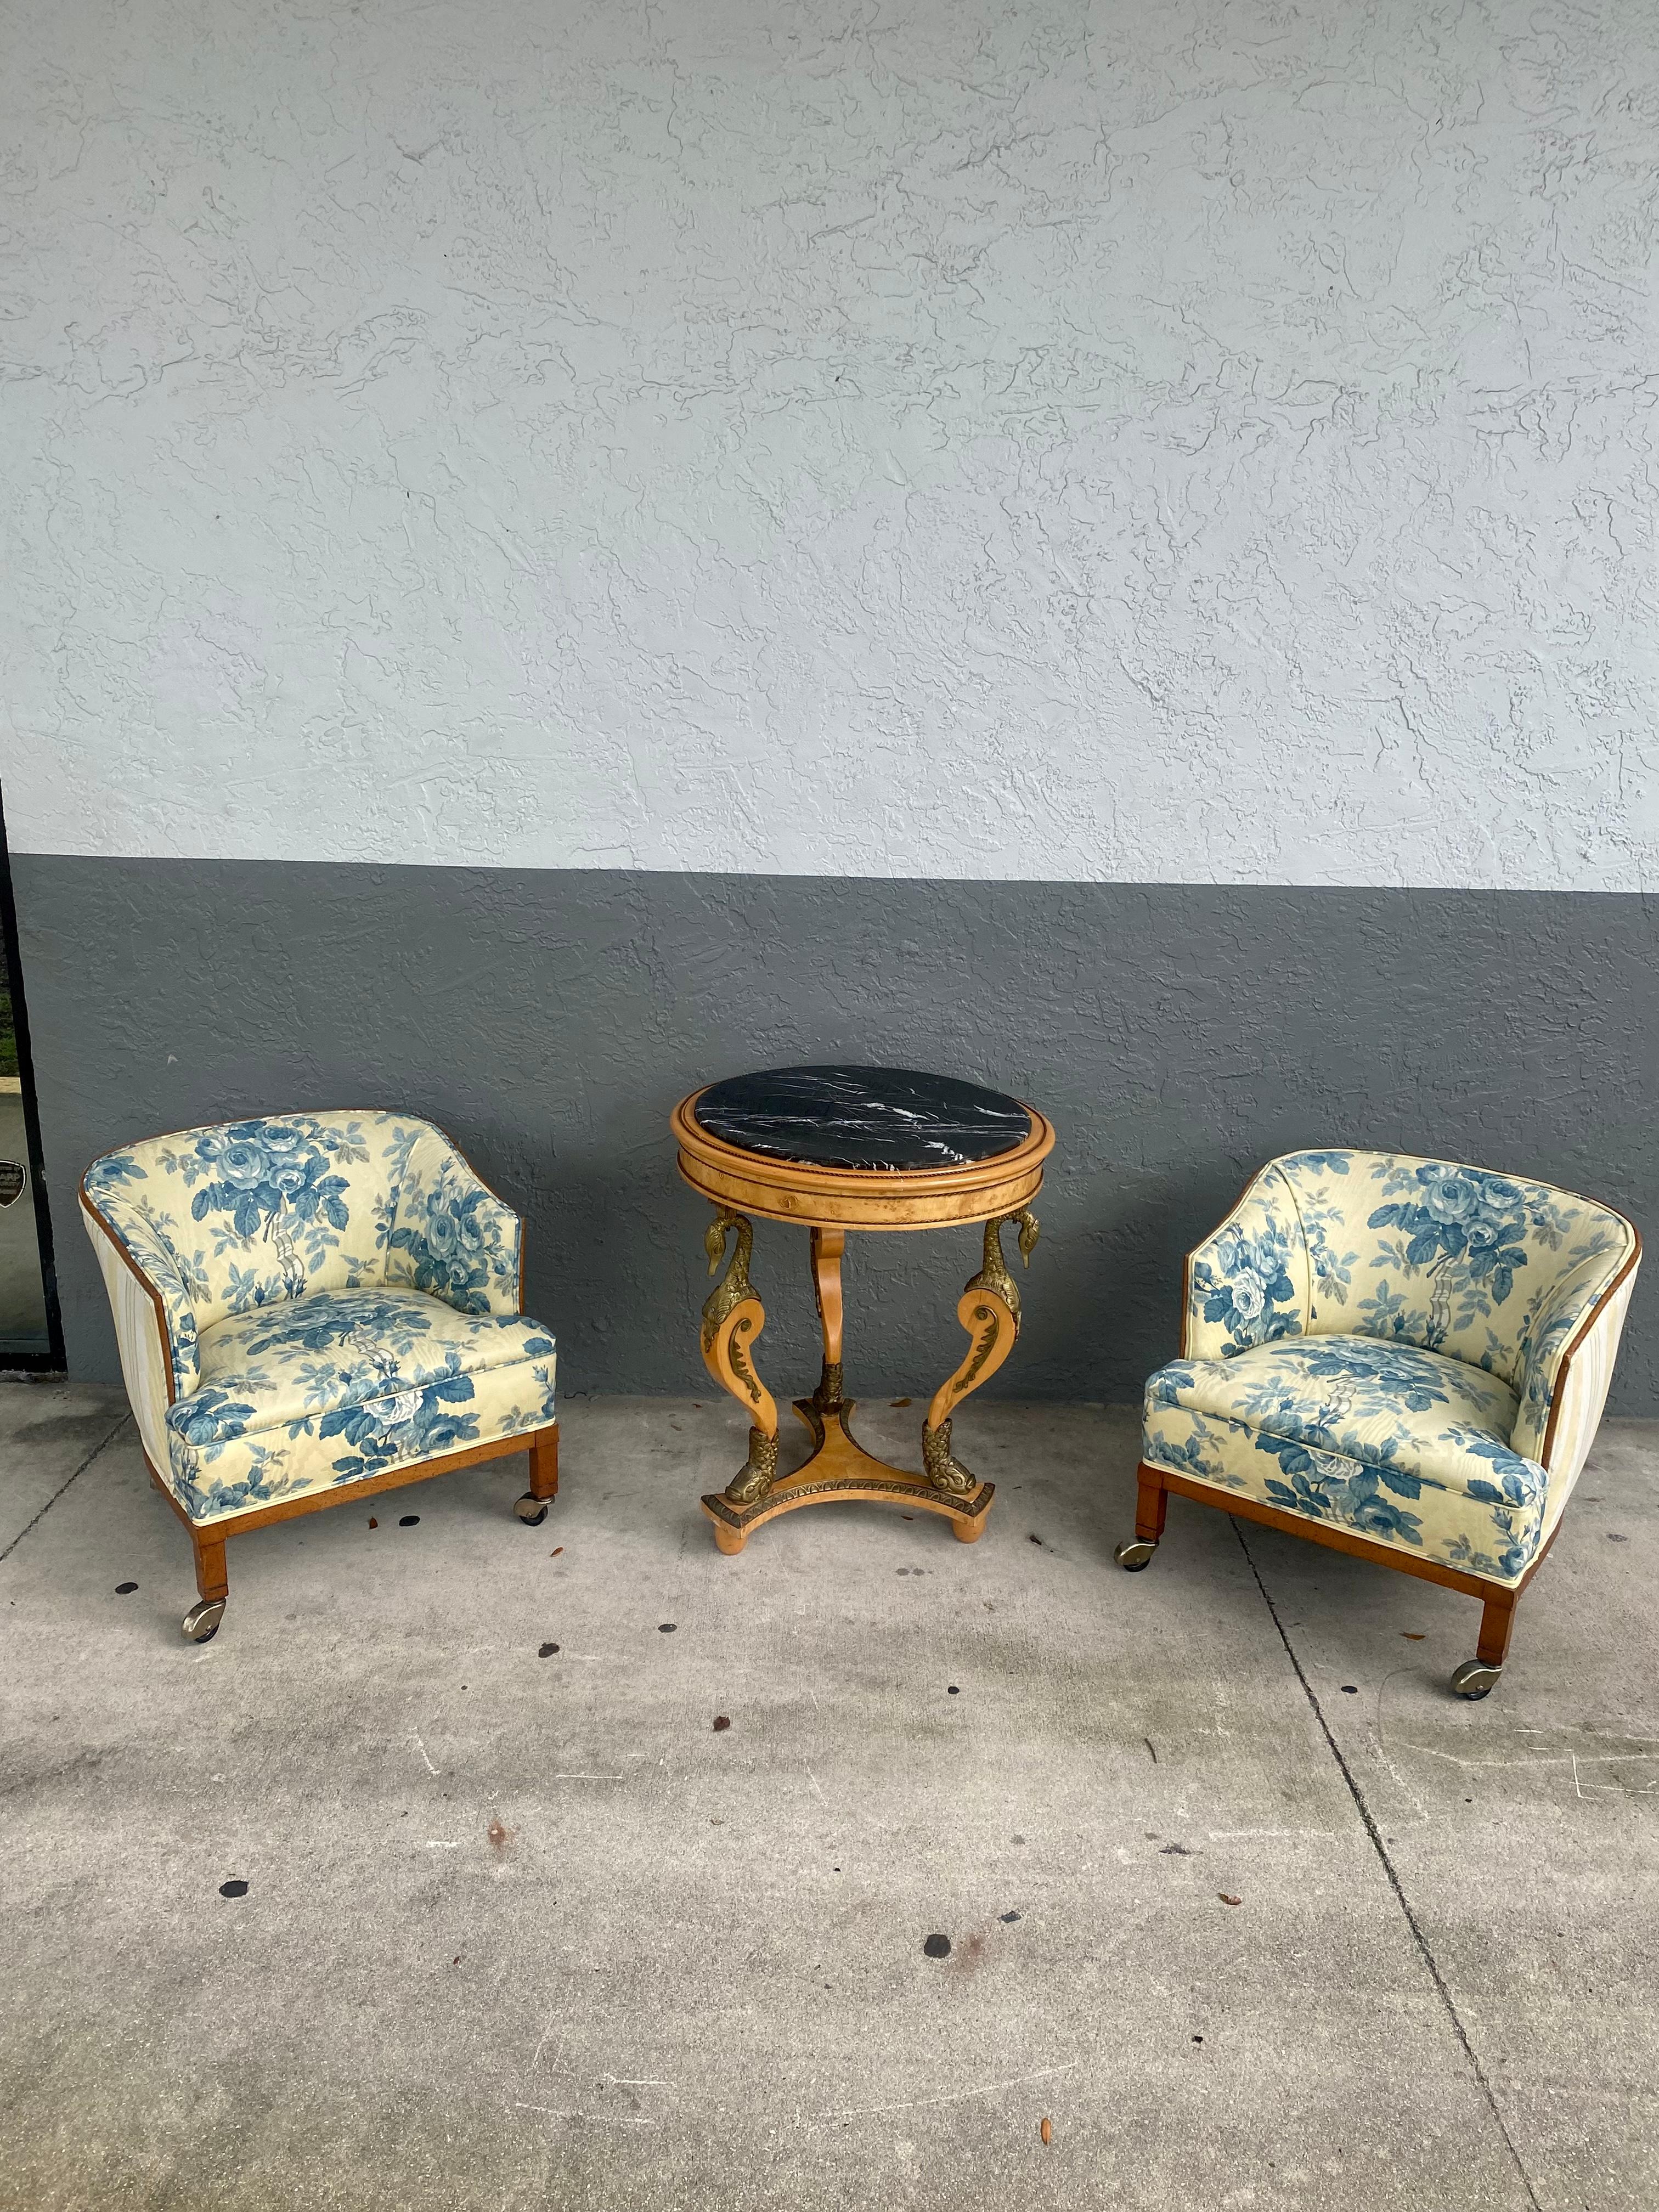 1960s French Toile Barrel Back Wood Castors Chairs, Set of 2 For Sale 2